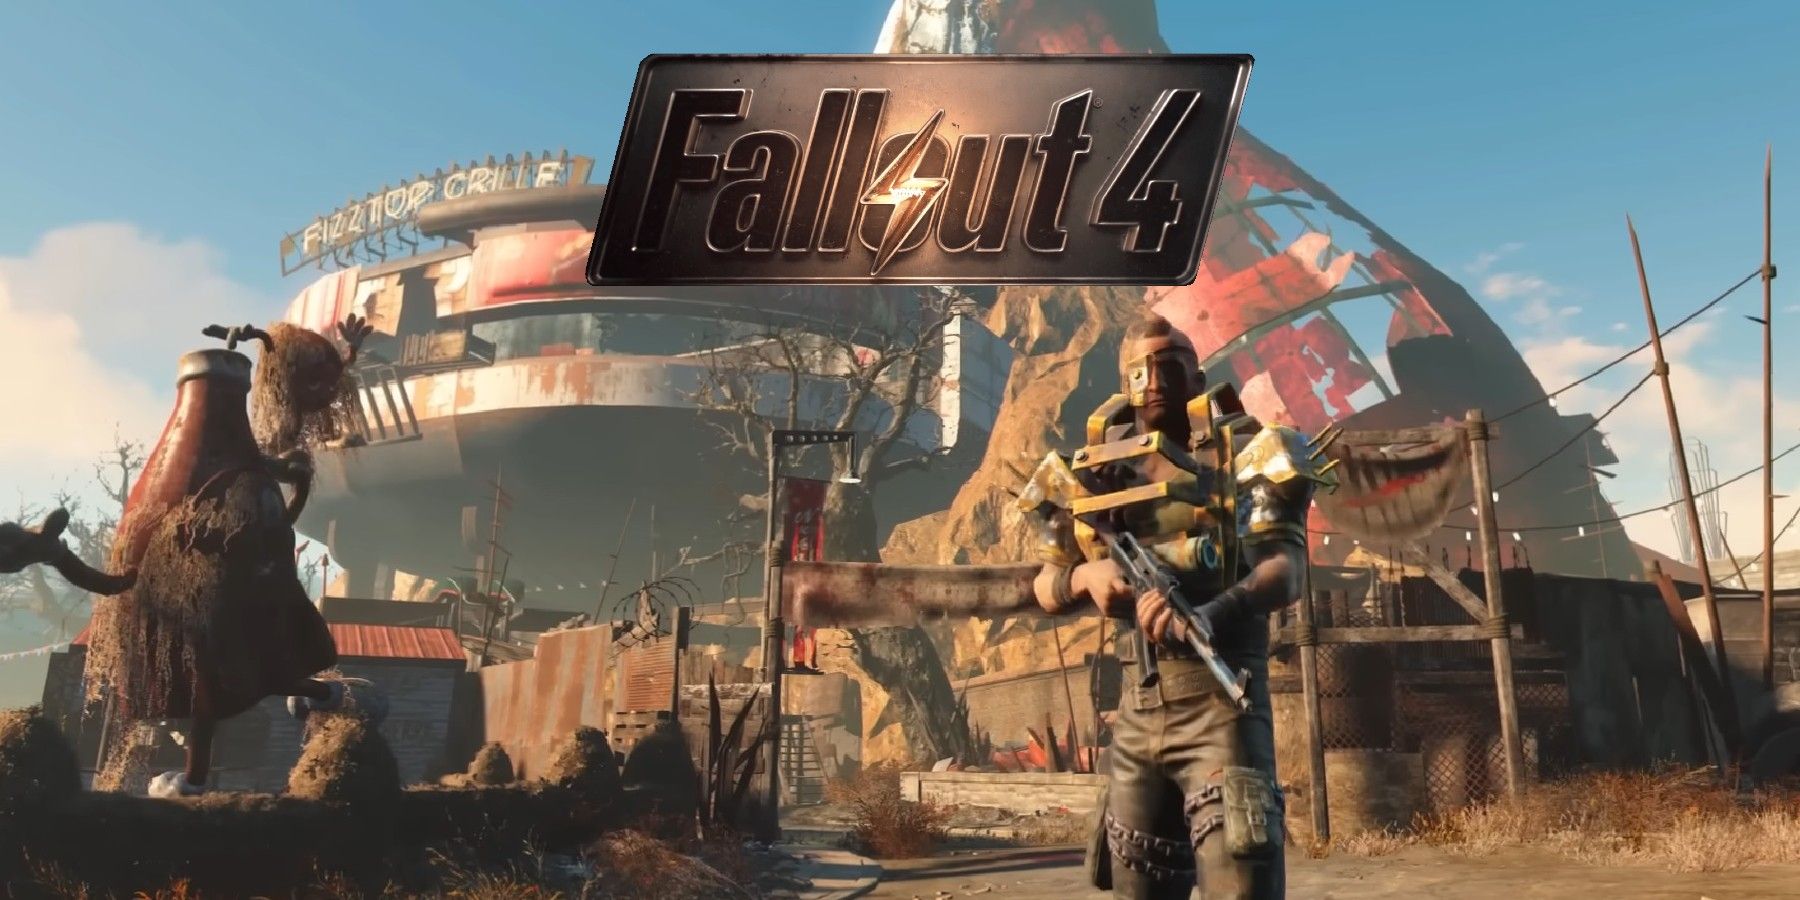 Master Fallout 4 Player Achieves 999% Completion in Epic Vase